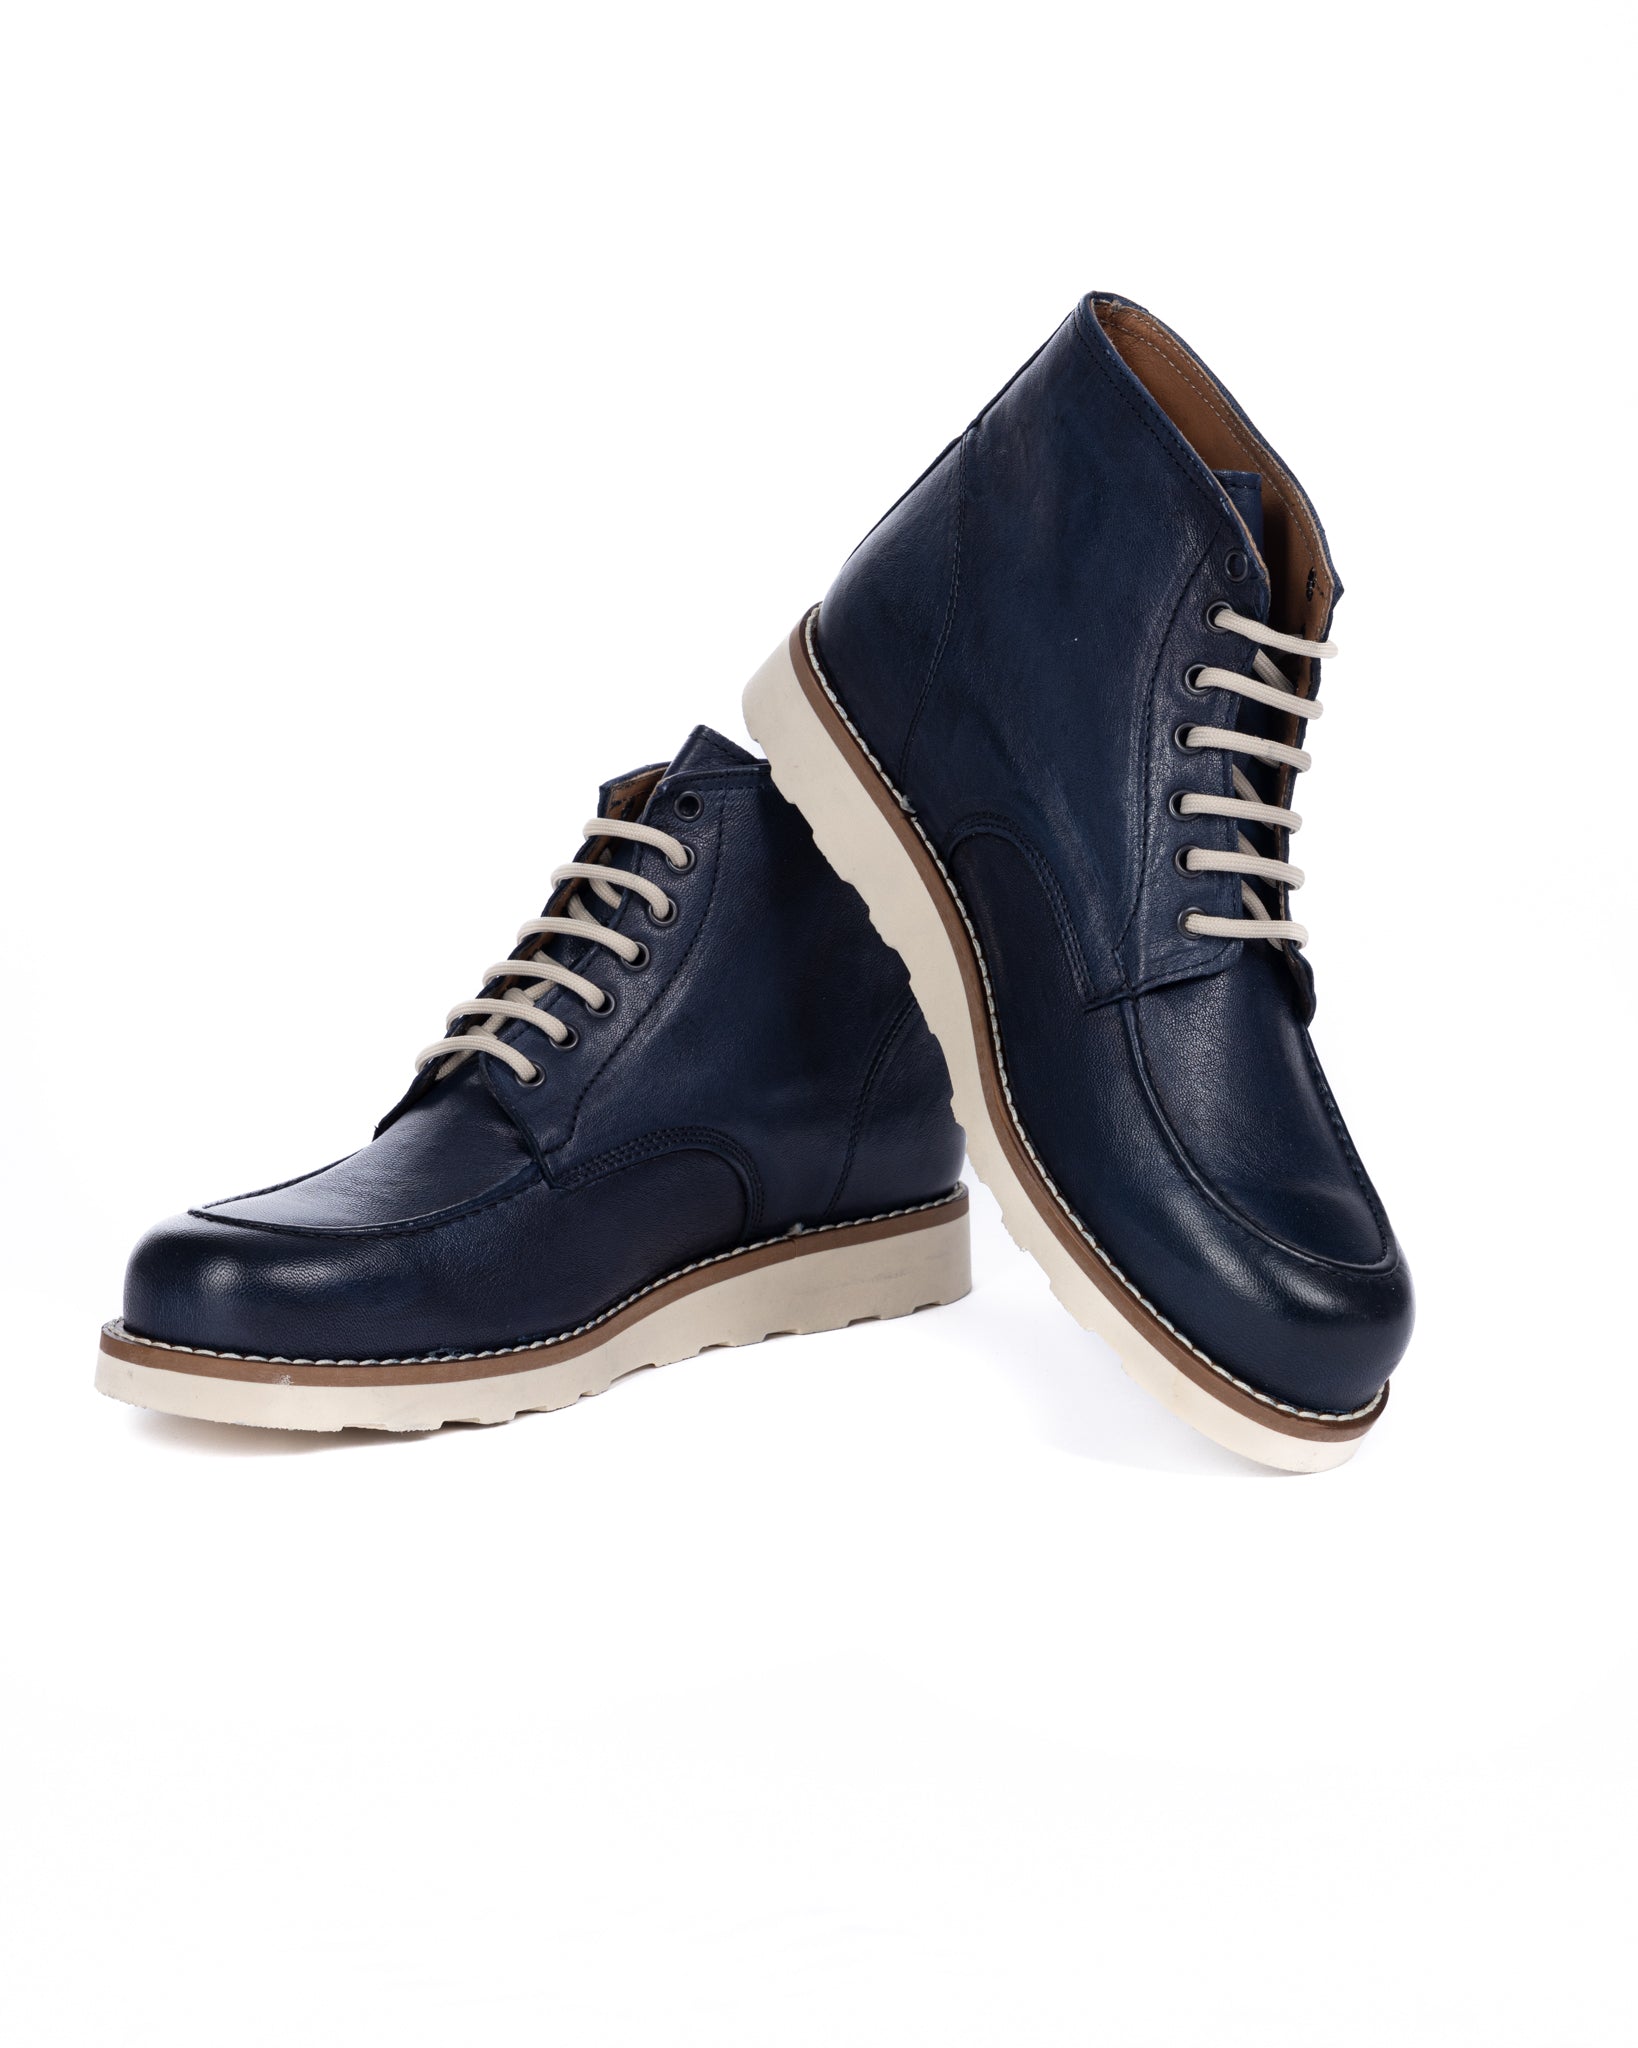 Moon - blue leather boot